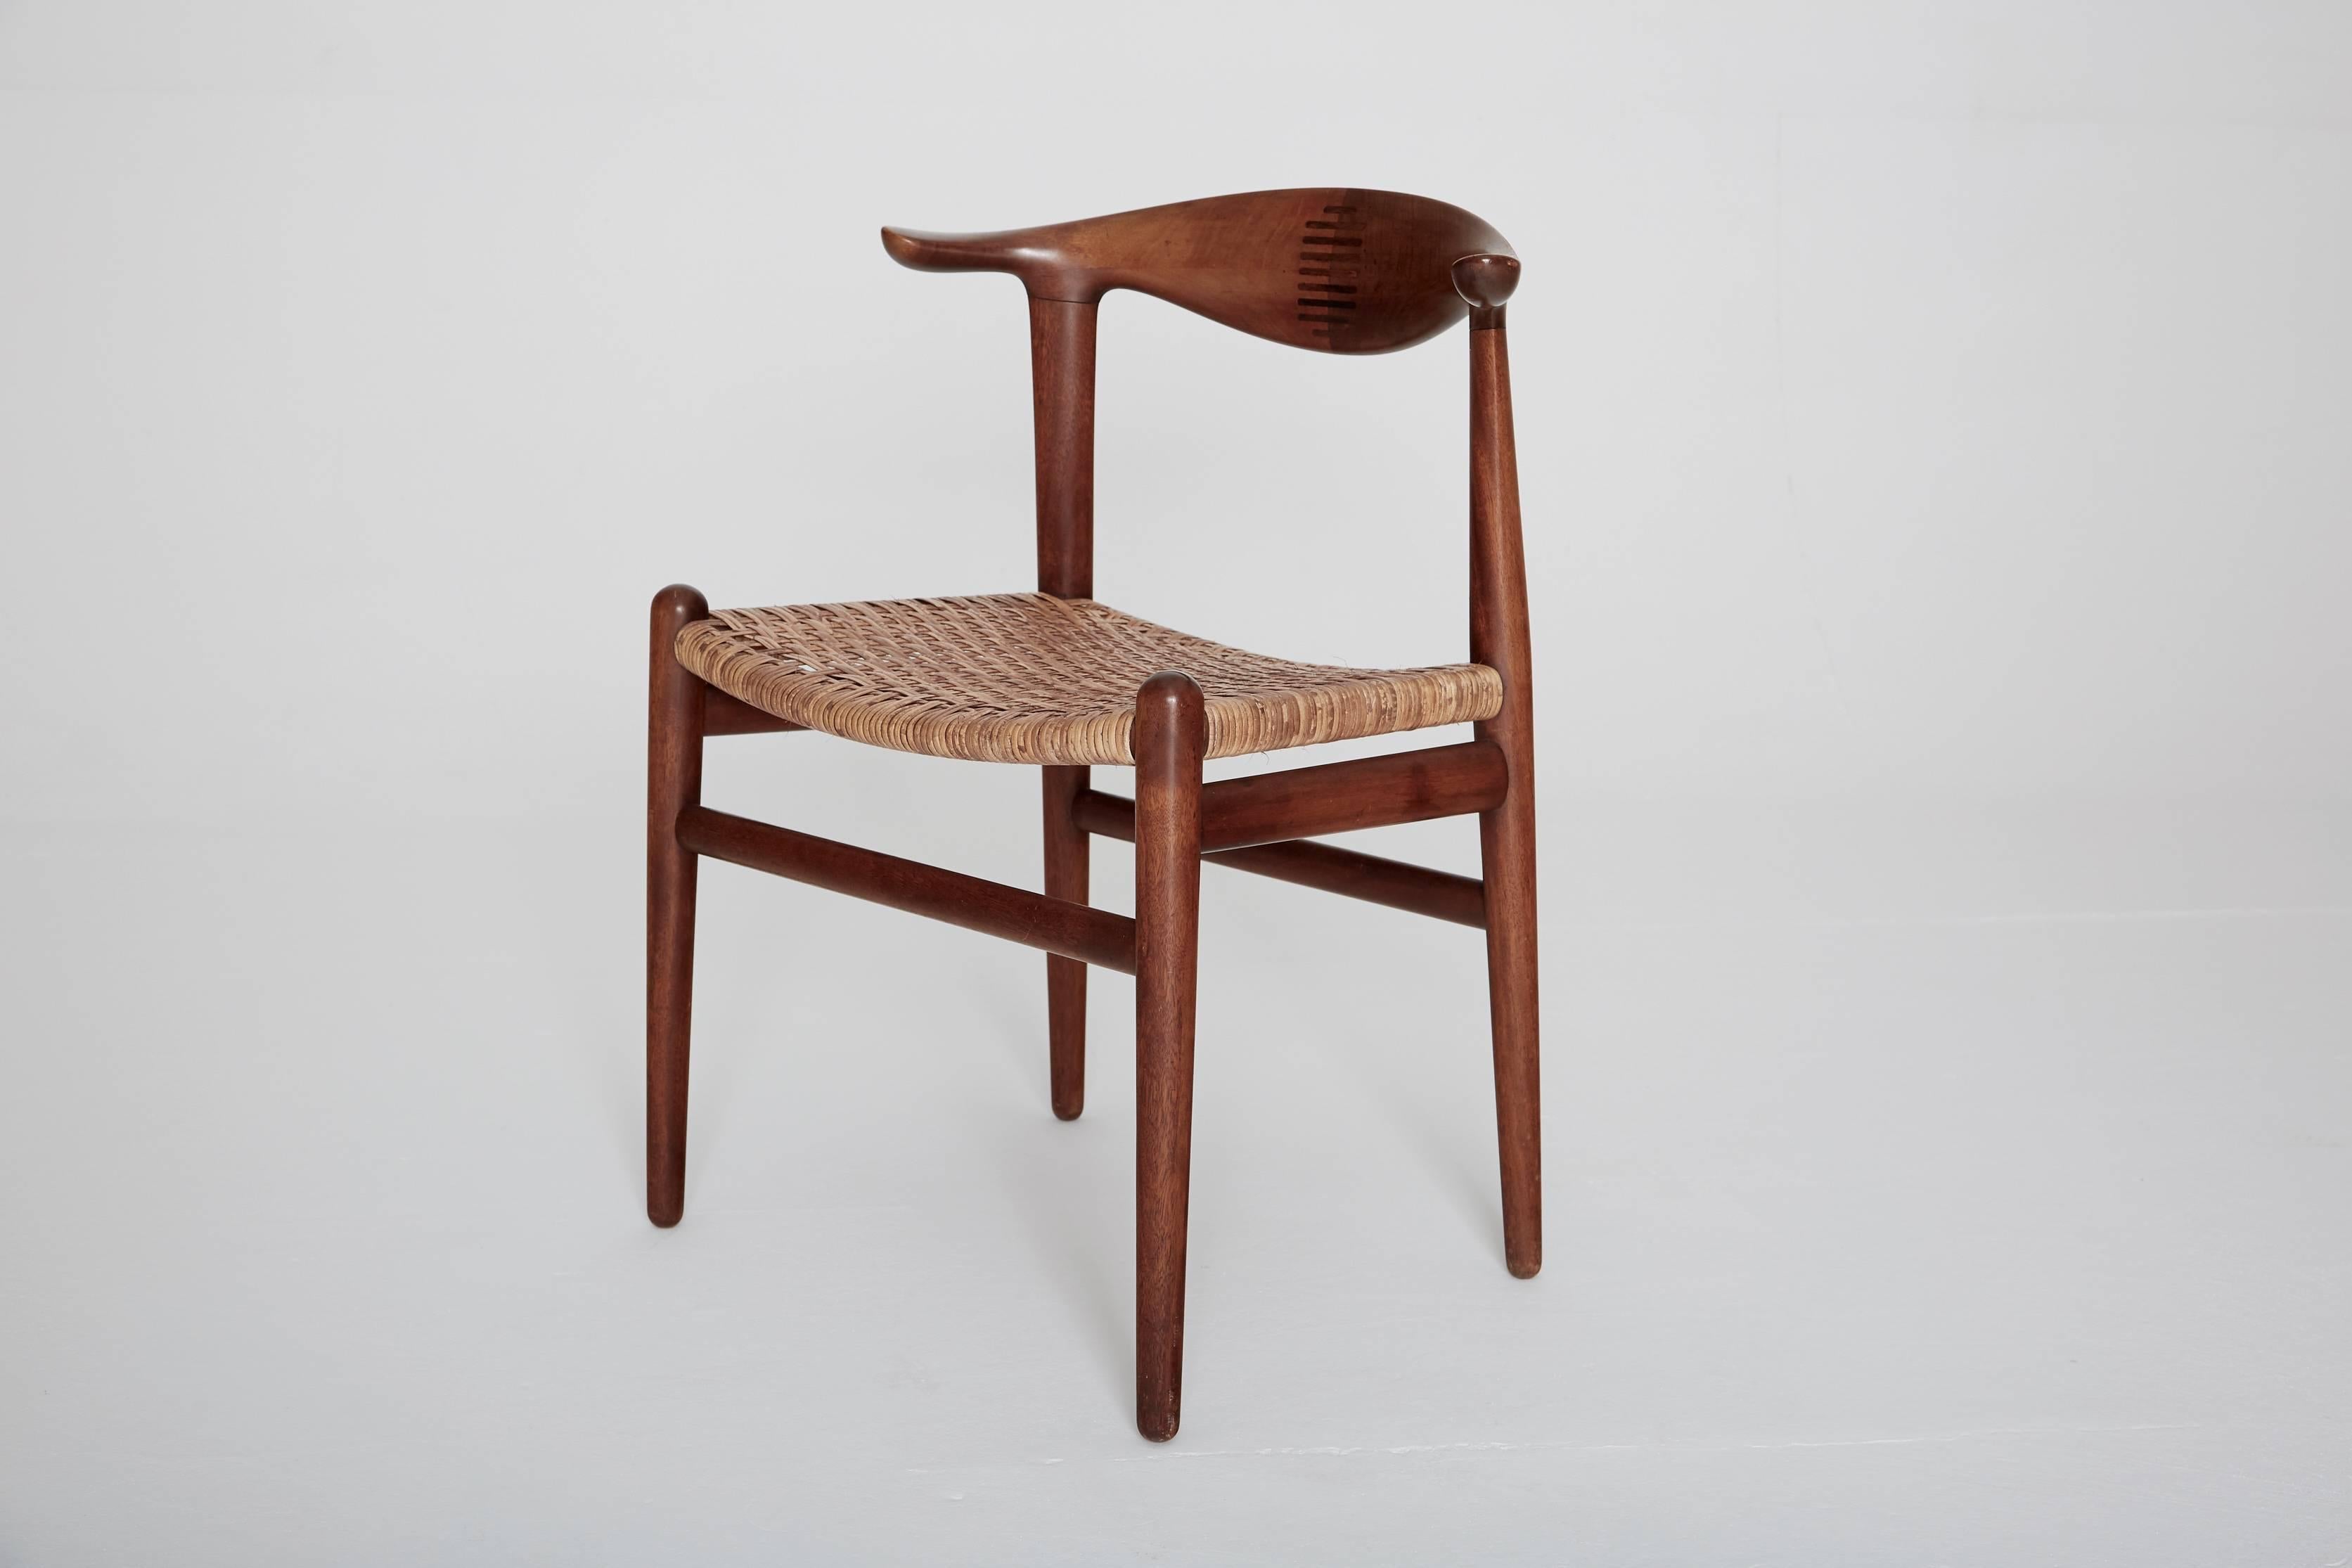 Hans Wegner cow horn (Kohornstol) Chairs model JH 505, made by Johannes Hansen, Denmark. Teak and rosewood inlay, with cane seats. A pair is available but the price it per chair and they can be sold individually.